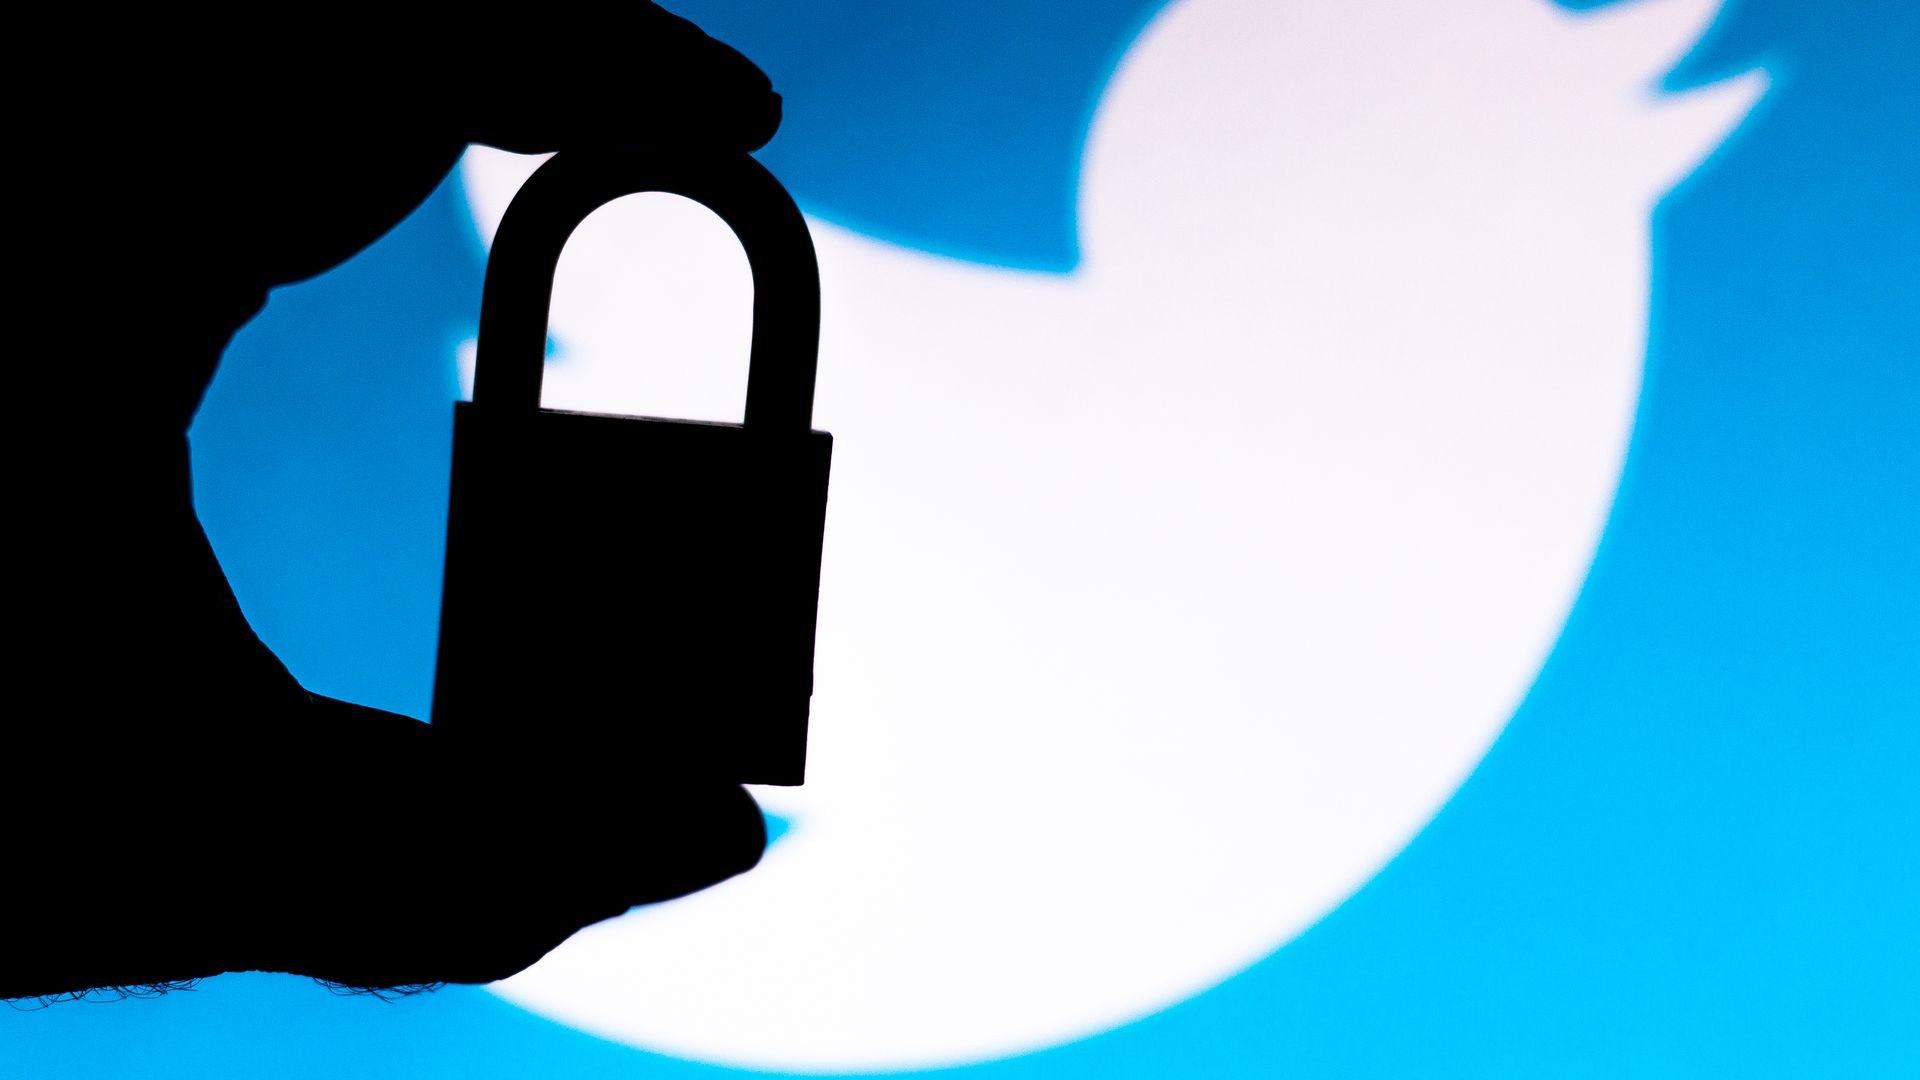 A photo illustration of a padlock in silhouette held in front of a large Twitter logo.